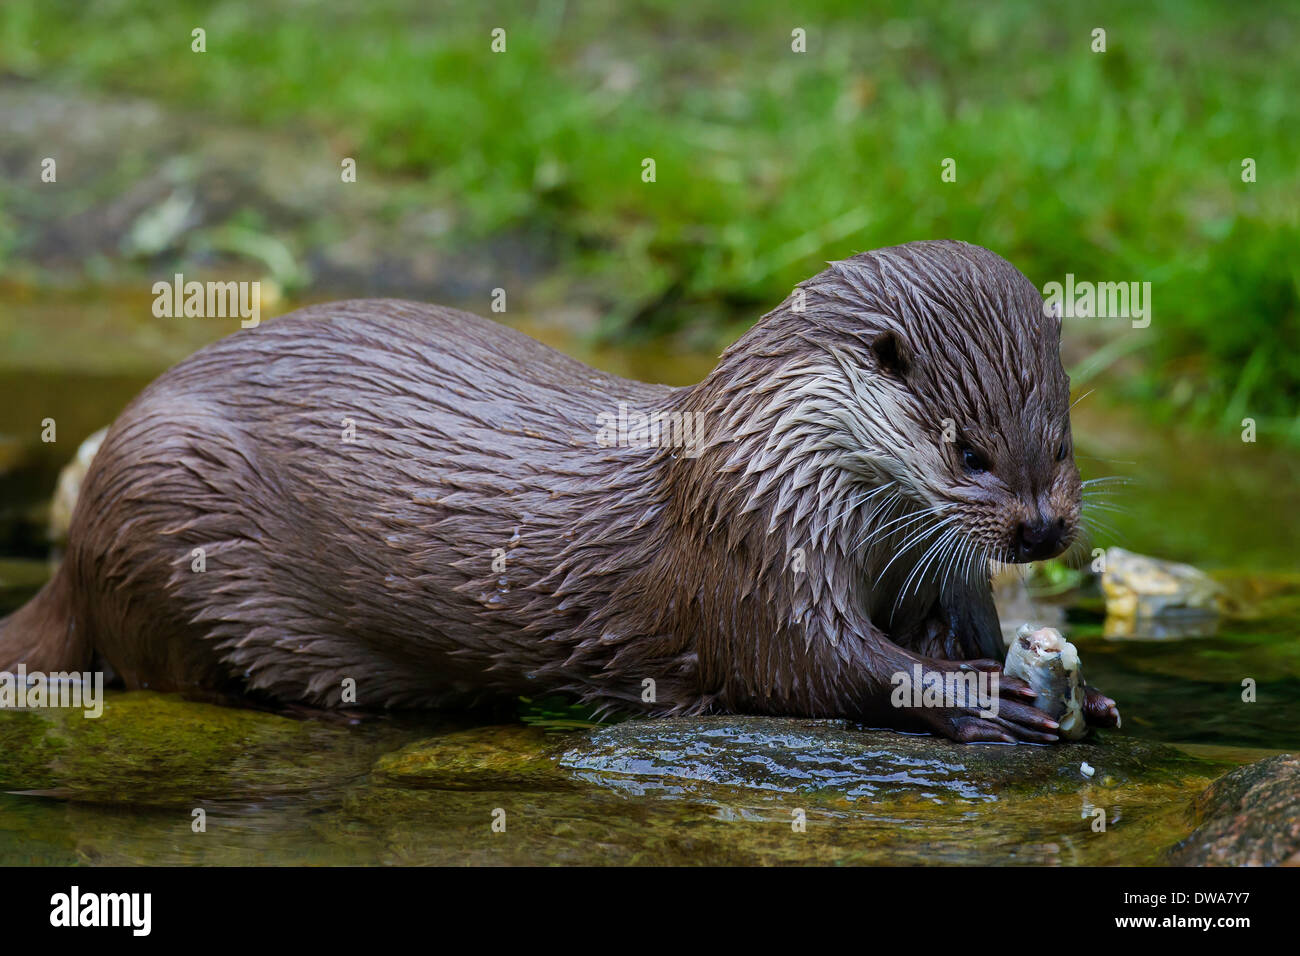 European River Otter (Lutra lutra) eating fish in water of stream Stock Photo